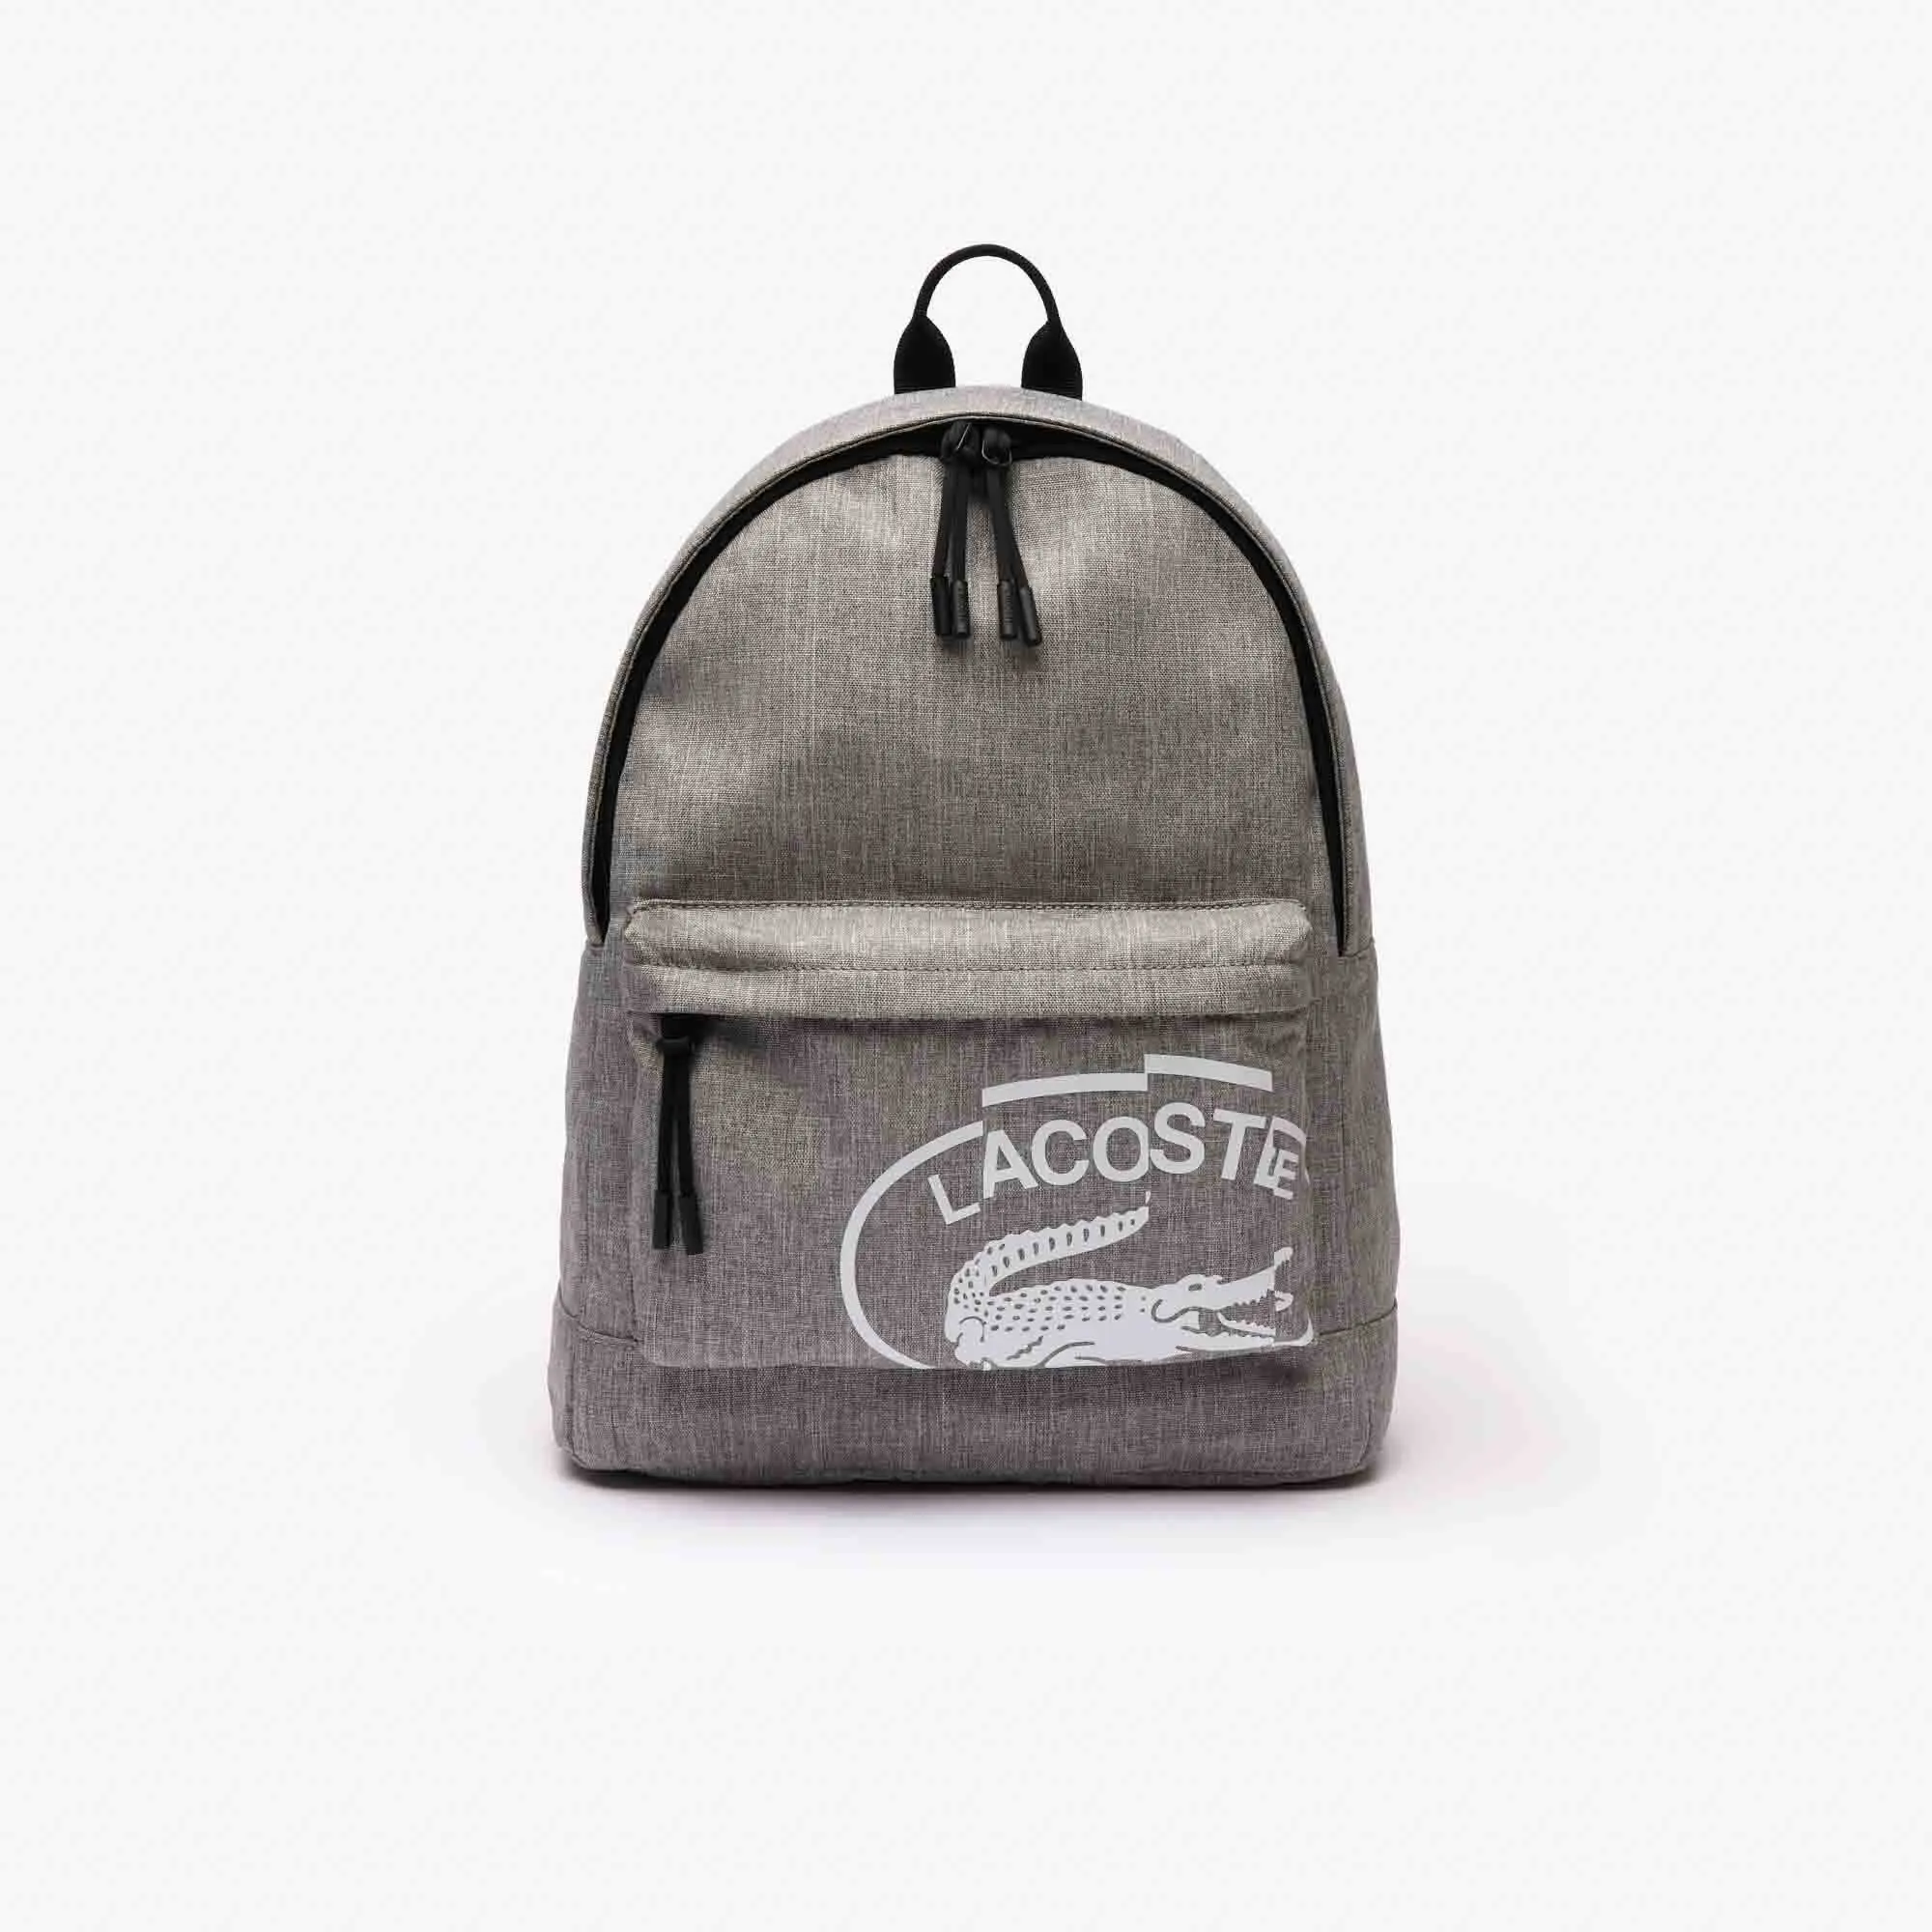 Lacoste Neocroc Lacoste Print Backpack. 1